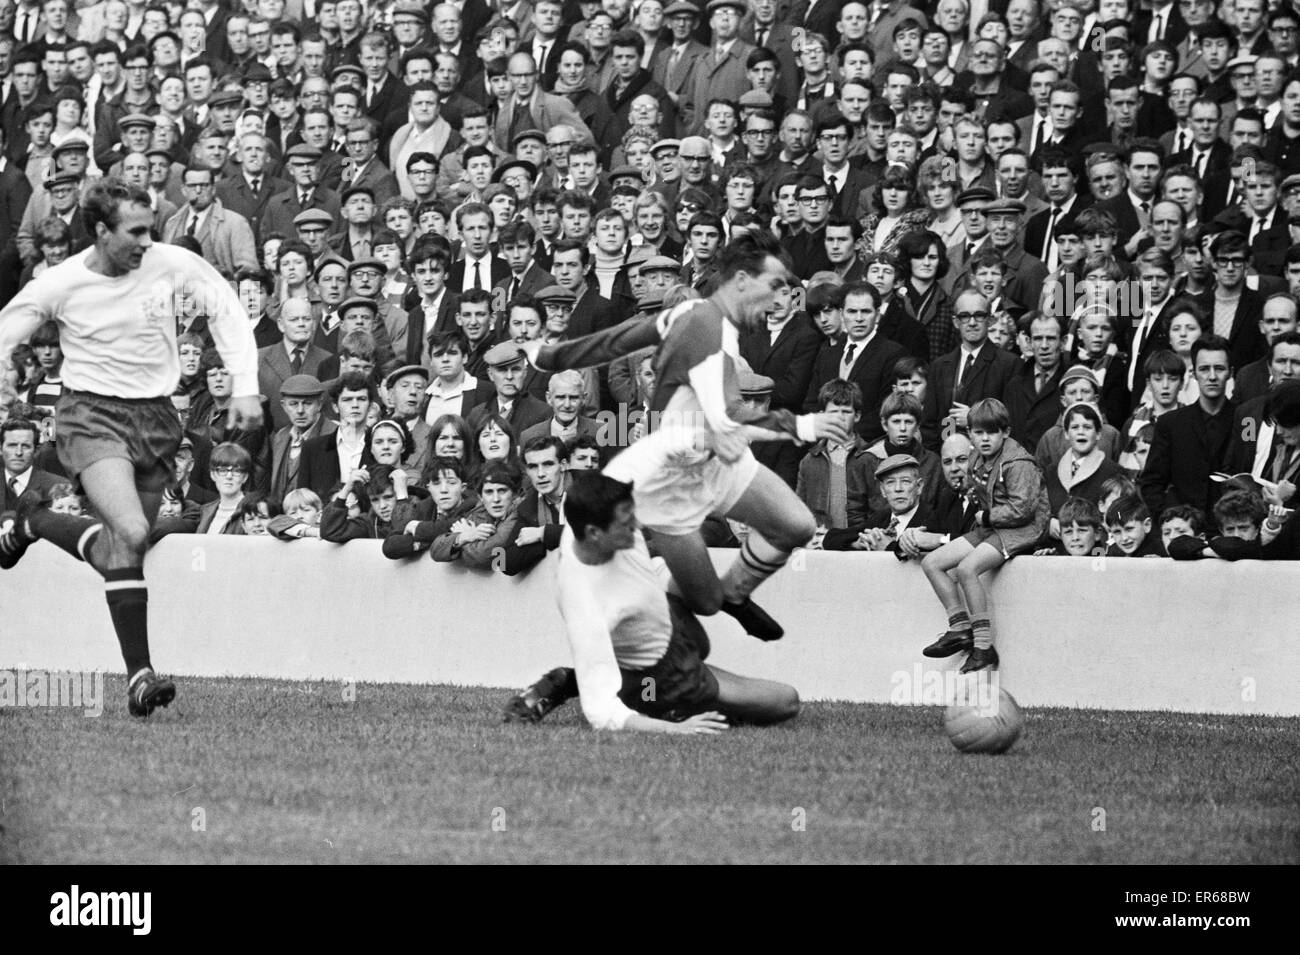 English League Division Two match at Ewood Park. Blackburn Rovers 2 v Bury 1. Blackburn's Bryan Douglas about to hit the ground after a tackle from Colquhon of Bury. 8th October 1966. Stock Photo